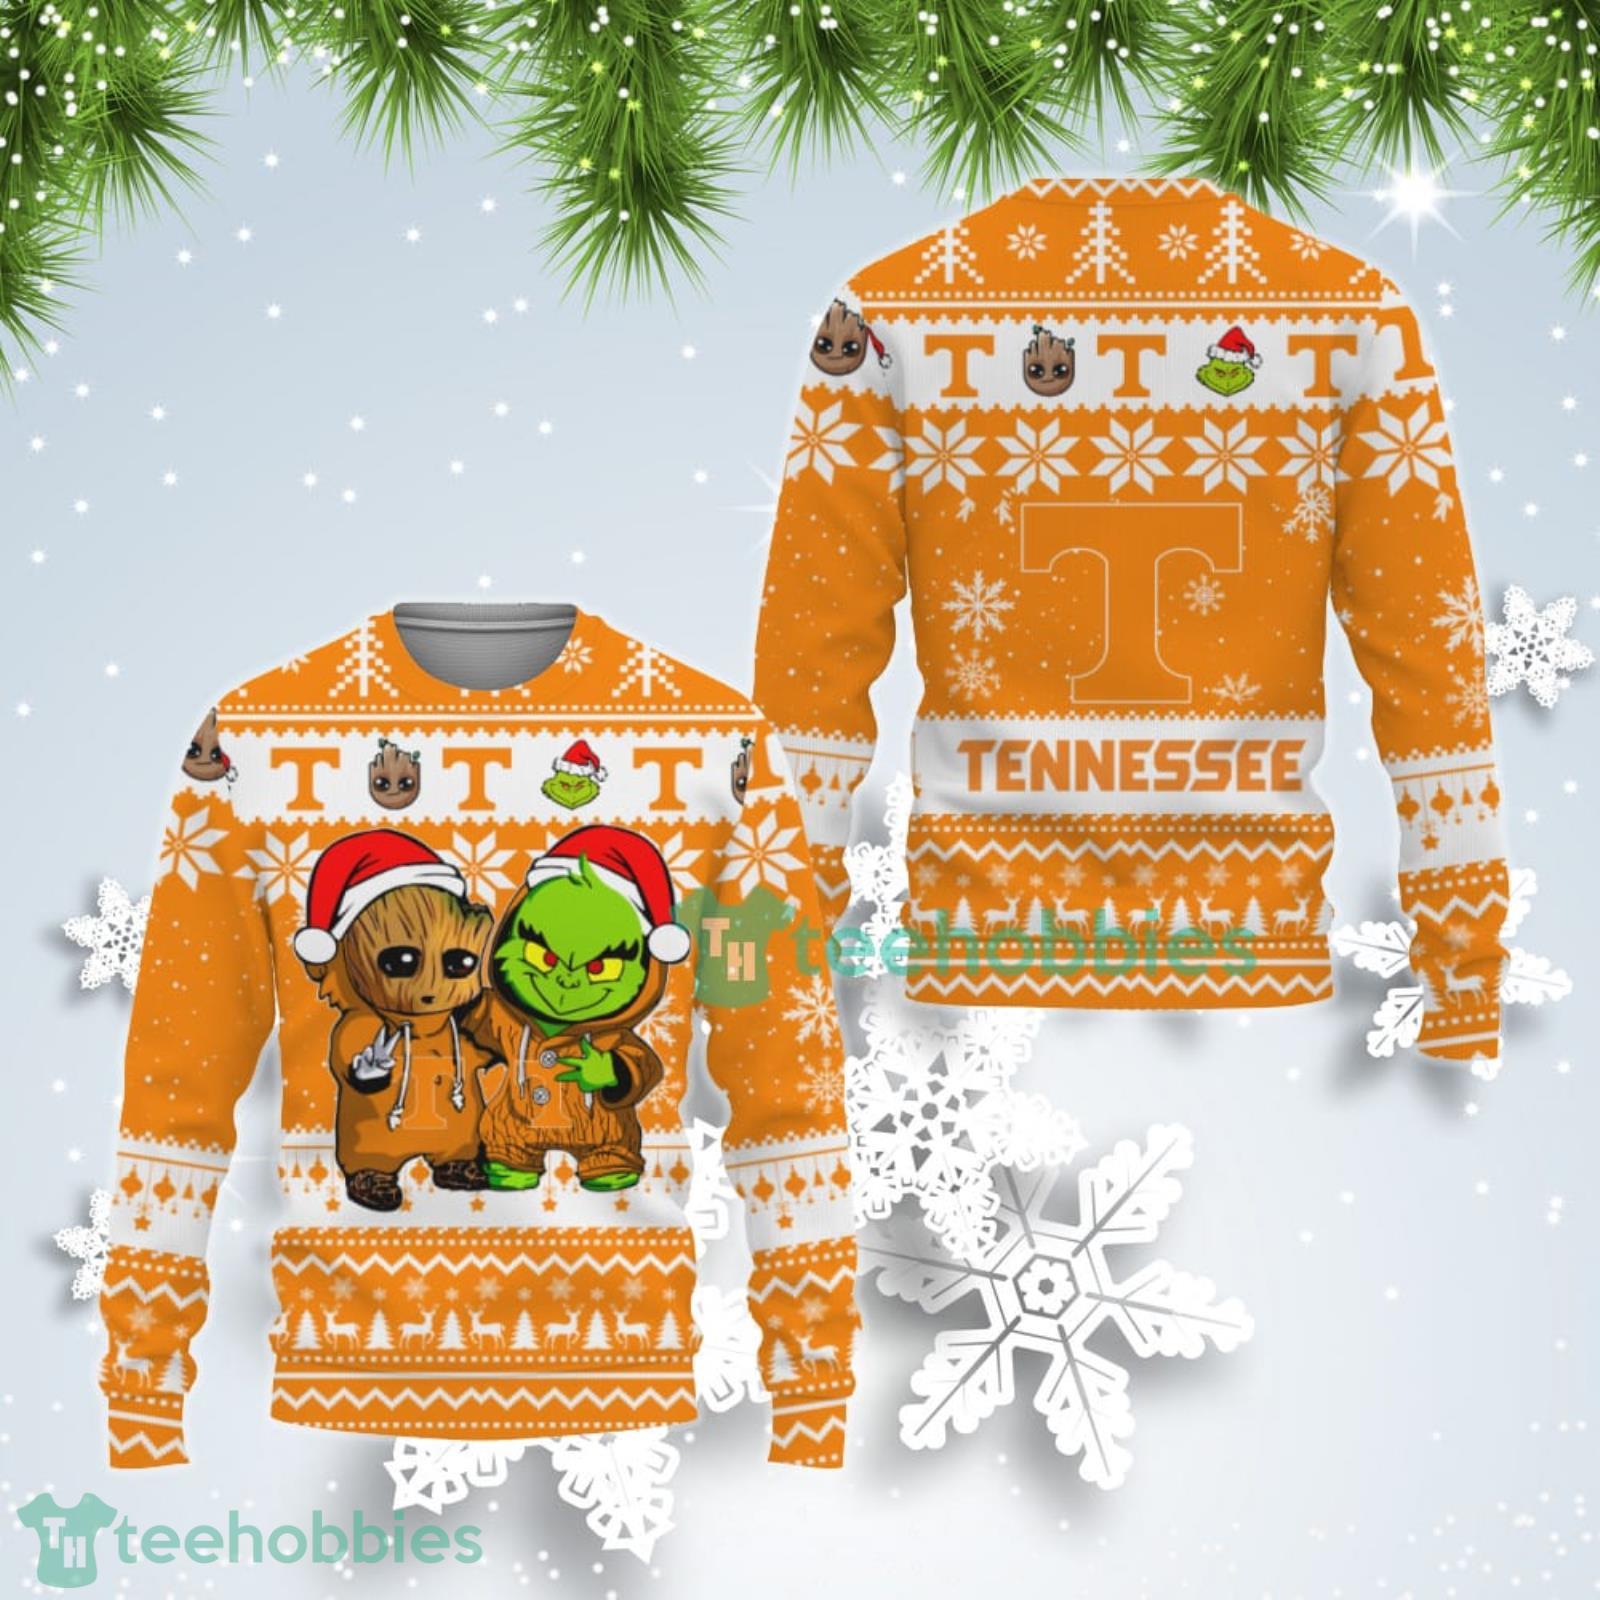 Tennessee Volunteers Baby Groot And Grinch Best Friends Ugly Christmas Sweater Product Photo 1